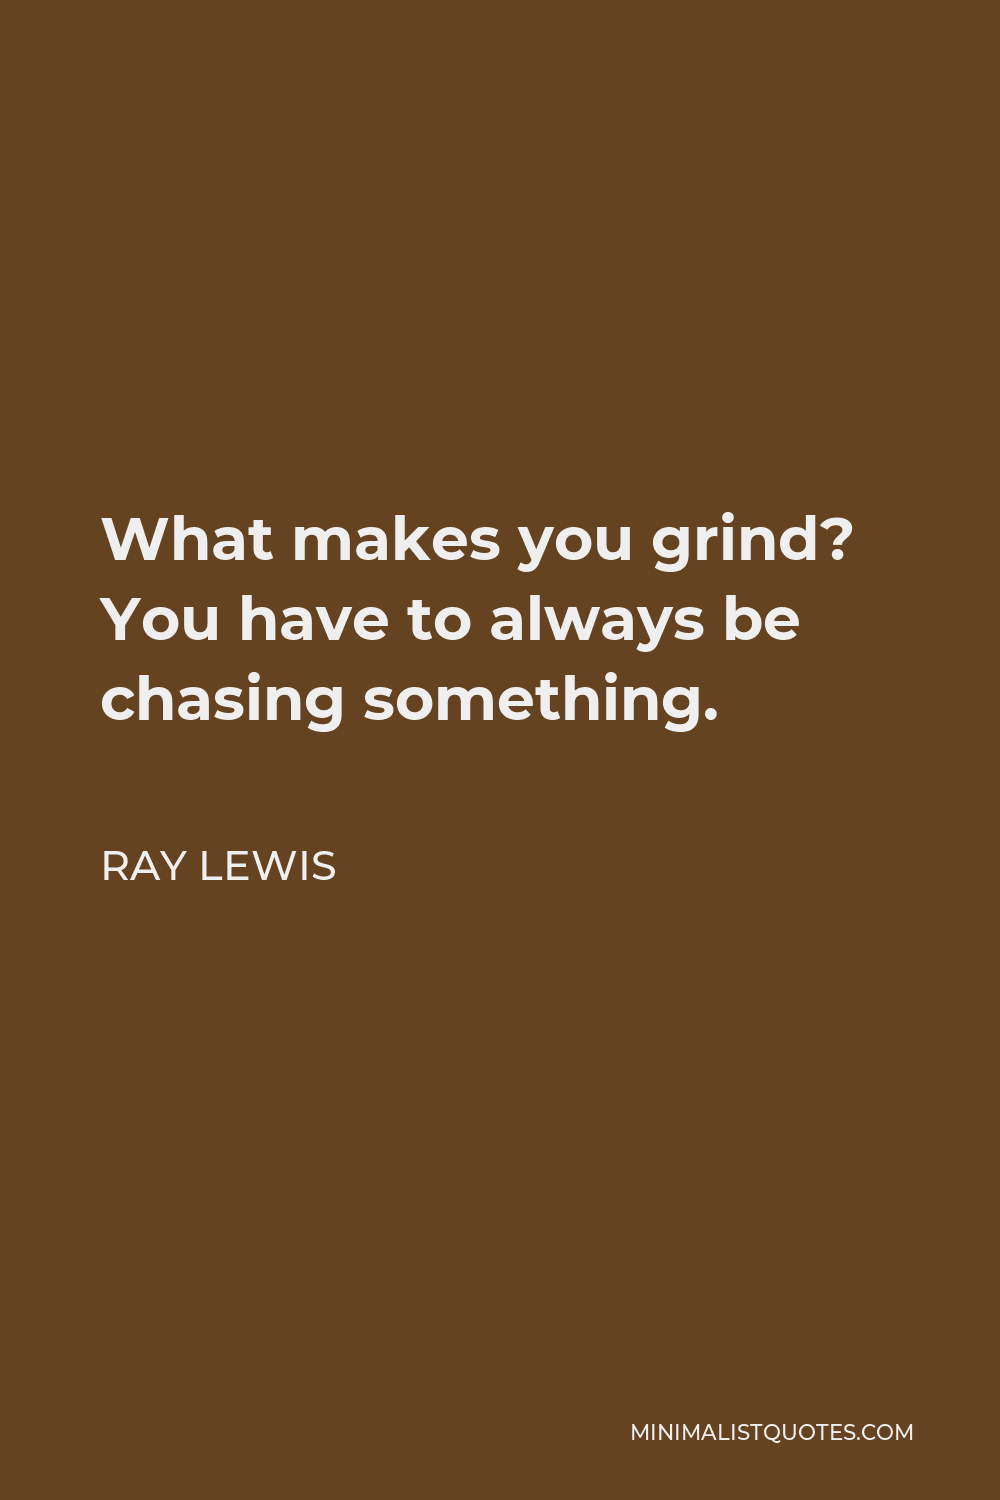 Ray Lewis Quote - What makes you grind? You have to always be chasing something.